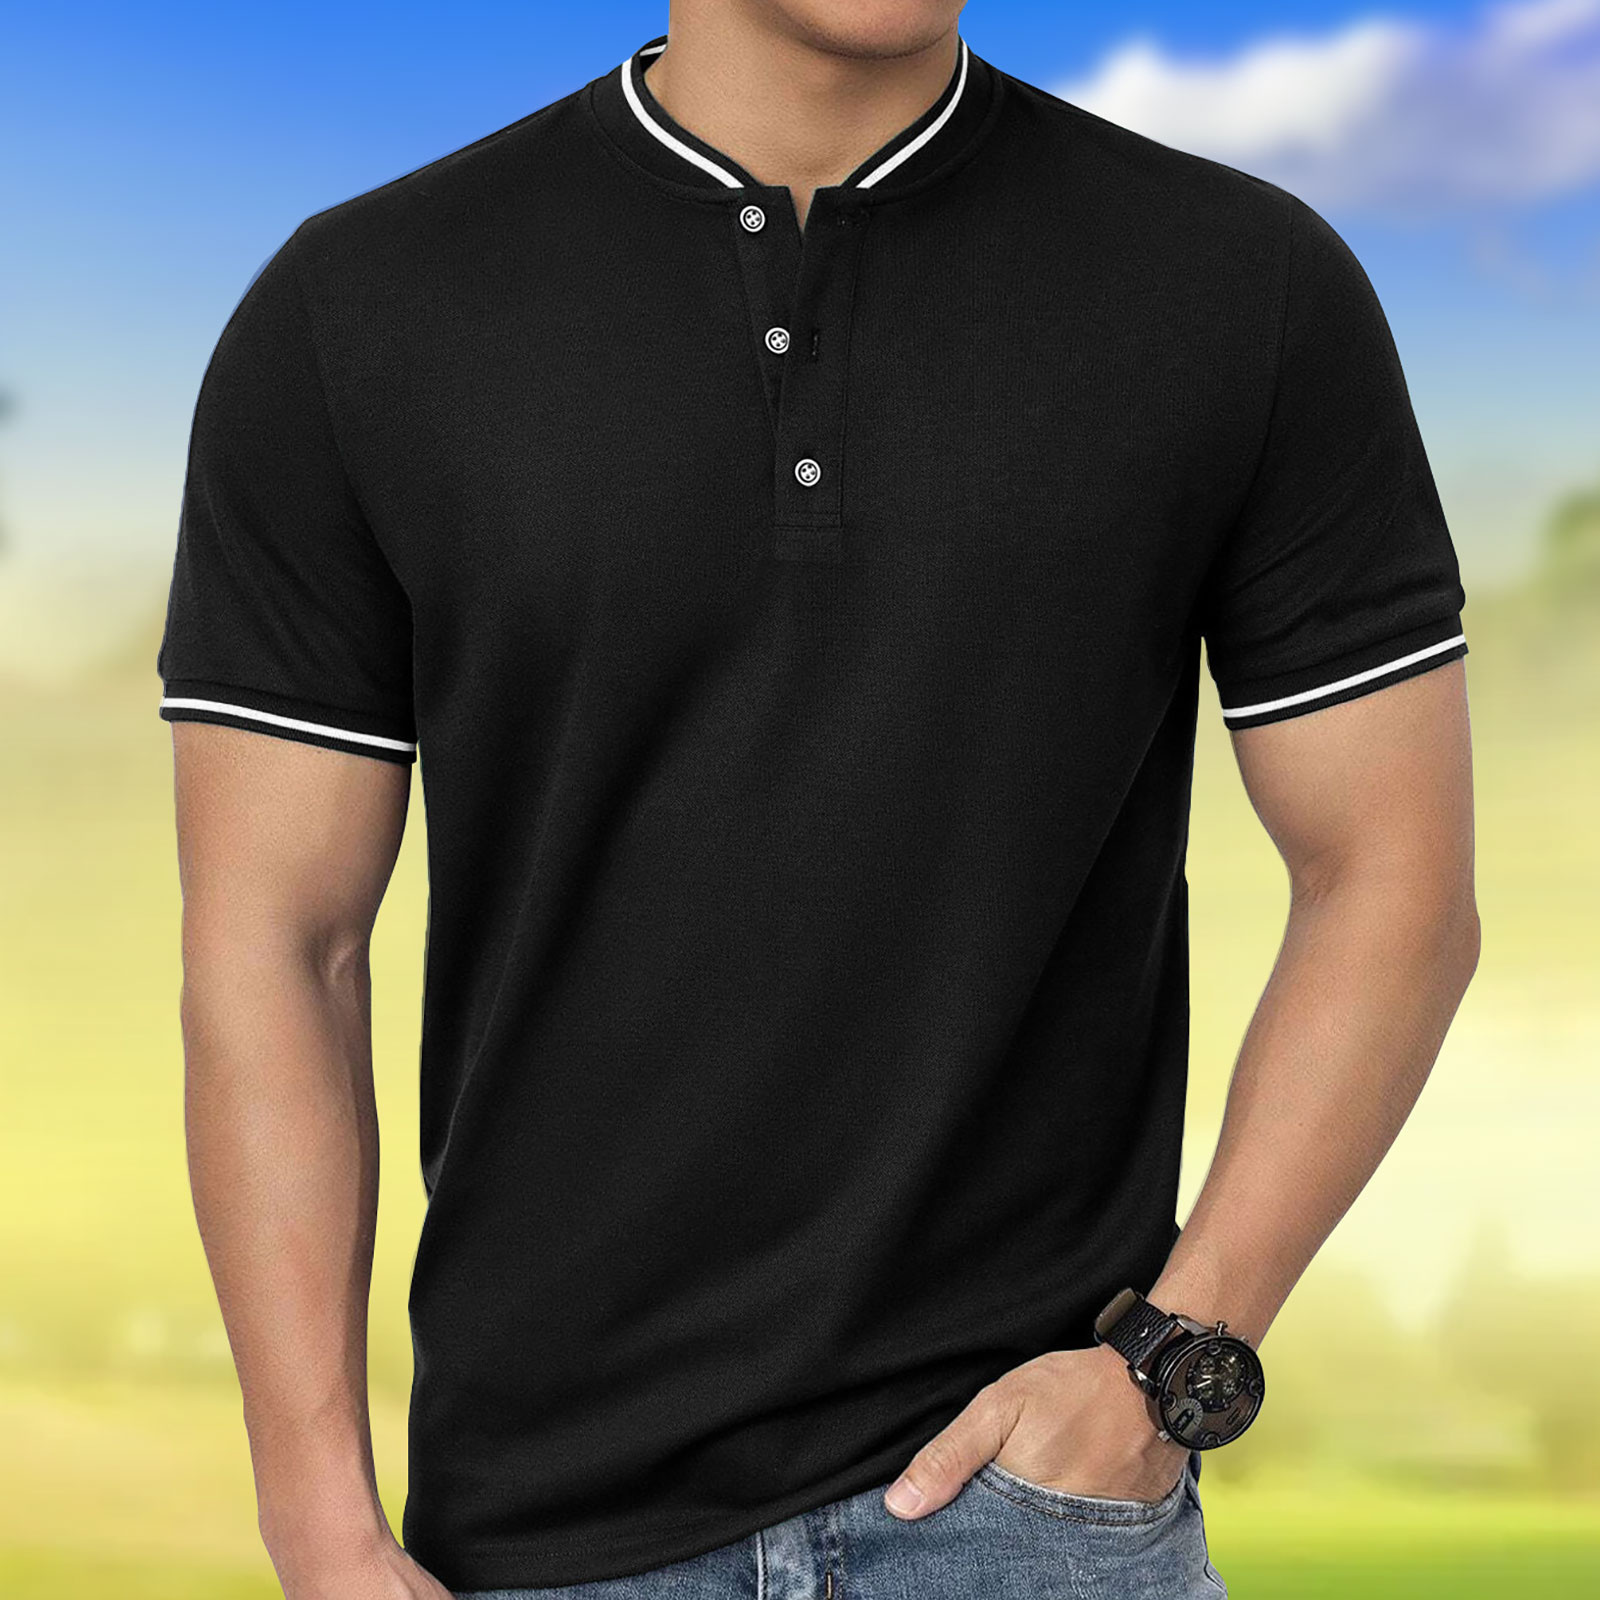 

Solid Men's Short Sleeve Golf Shirt, Business Casual Comfy Top For Tennis Training